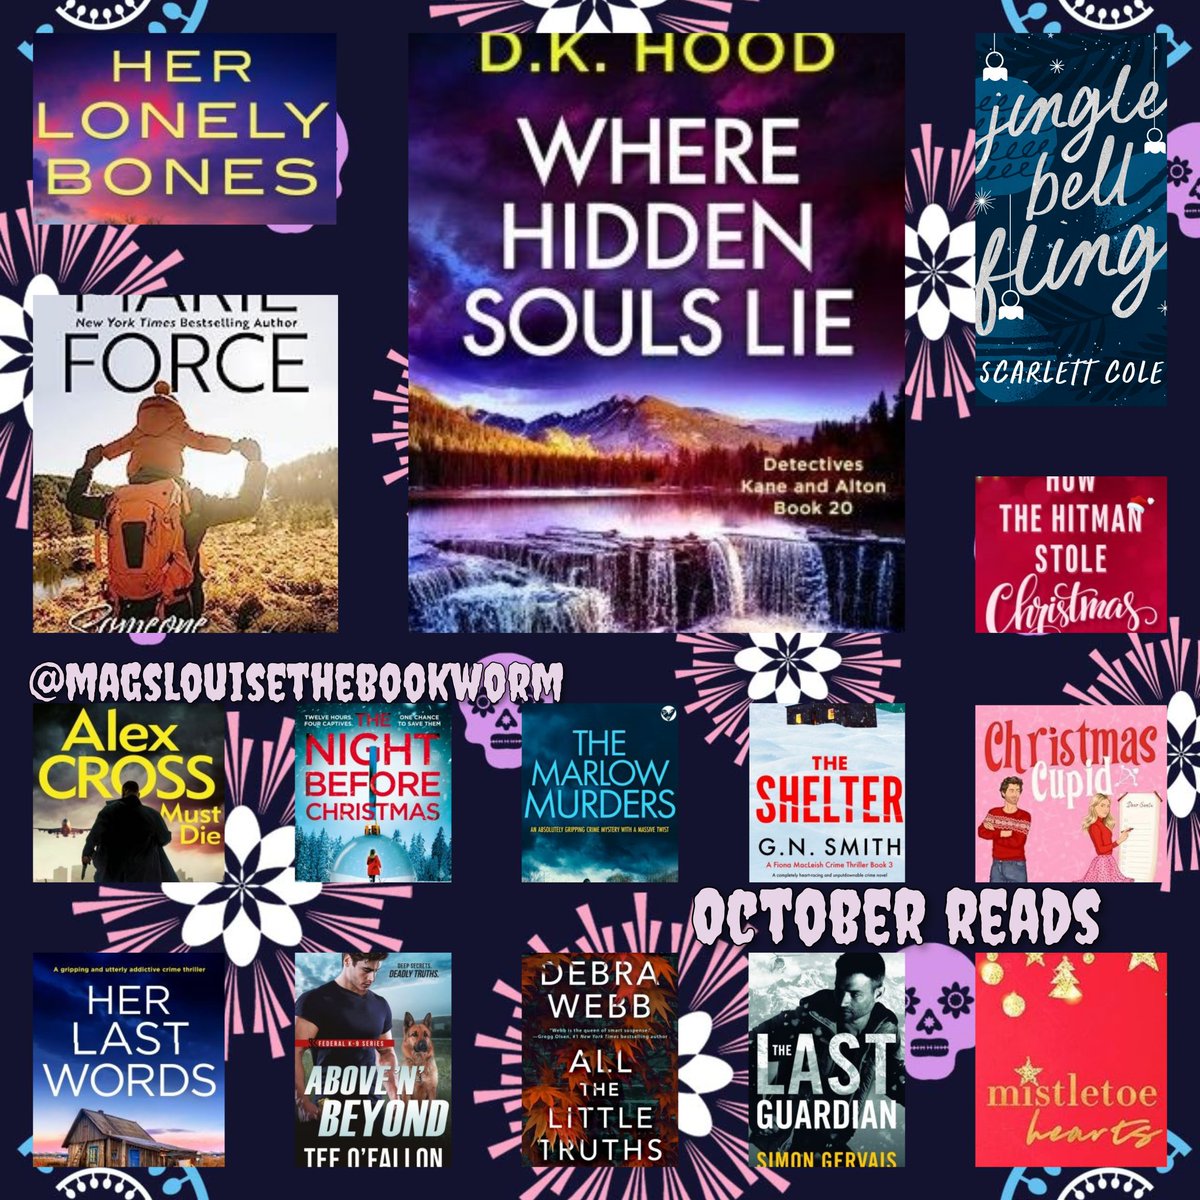 📚 OCTOBER ROUND UP 📚

15 Books
4 Five ⭐ Reads
12 ARCs
1 #BeatTheBacklog Read
10 New Books Purchased 😬
#WendyDranfield #MarieForce #KatieReus @GrahamSmith1972 @Carolyn_Arnold #MonthlyWrapUp #BookTwitter #BookCommunity #BookX #OctoberReads #OctoberRoundUp #booktwt